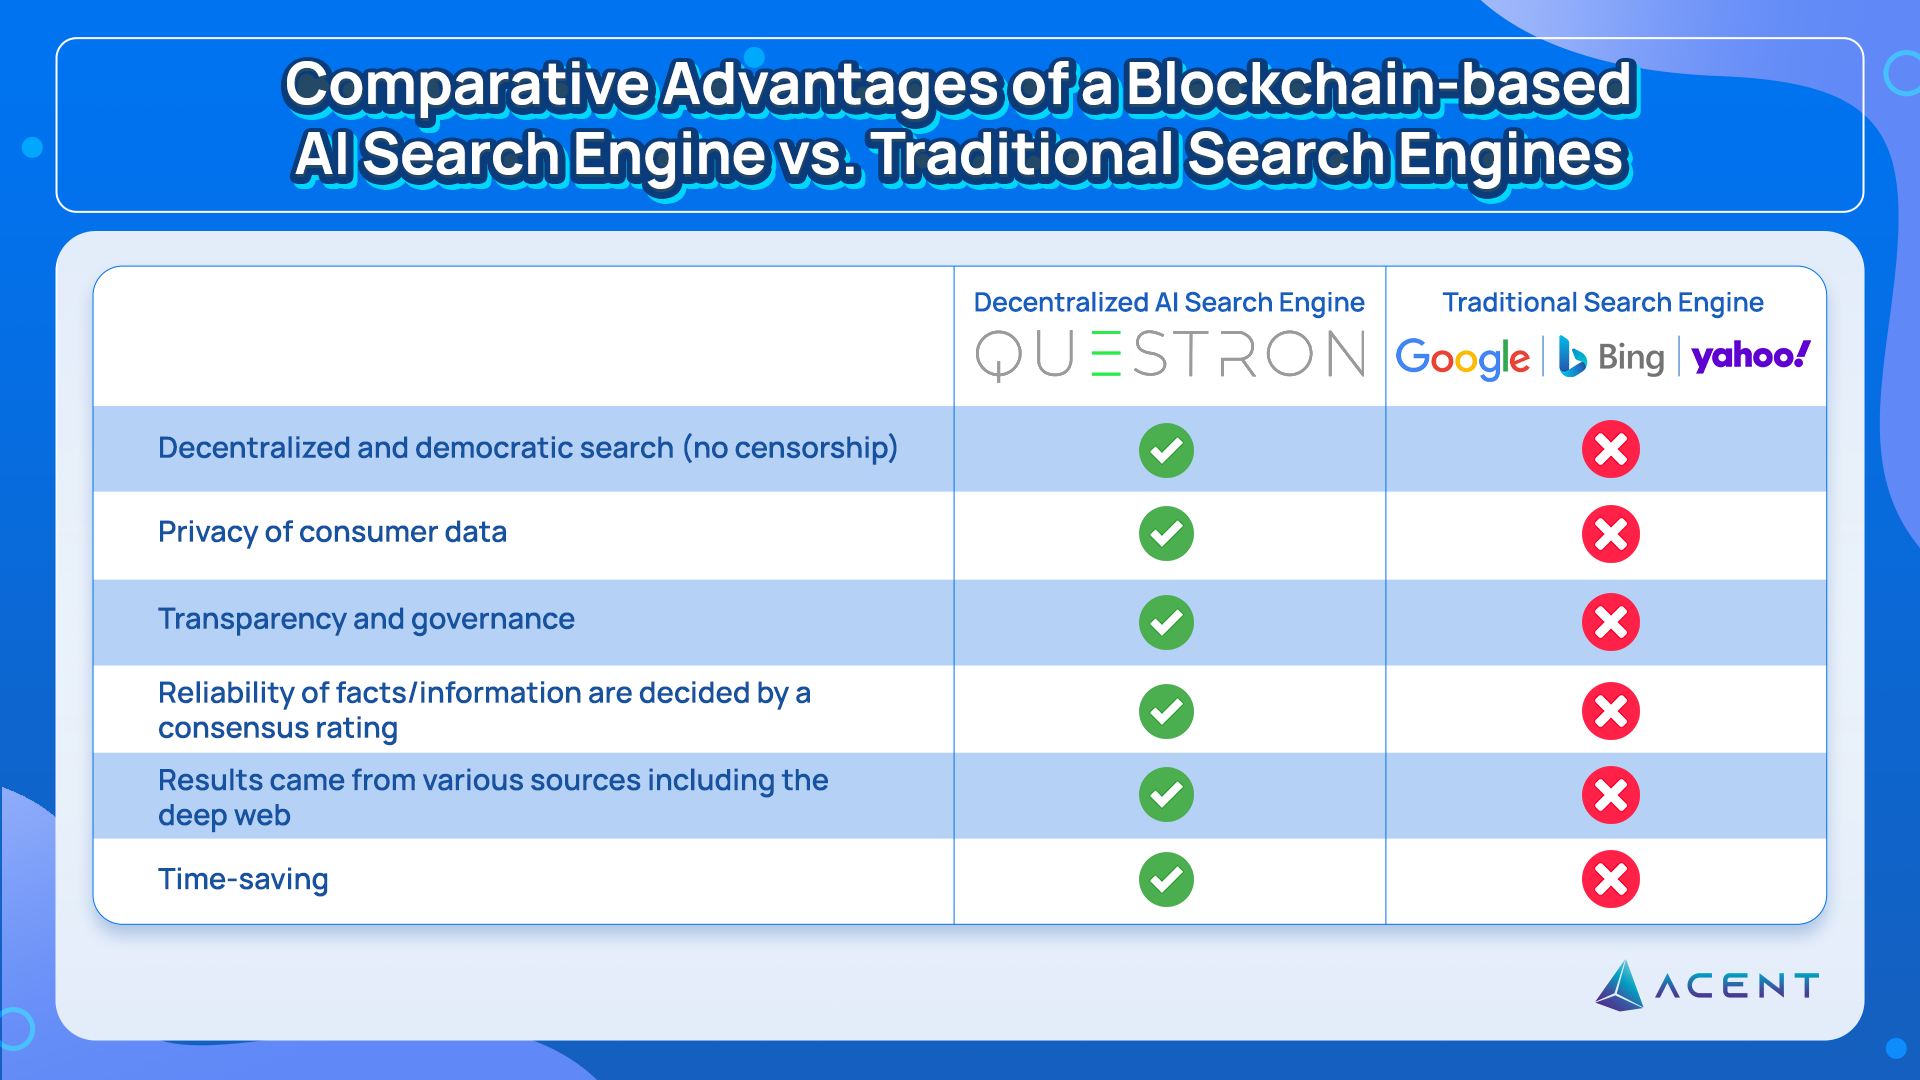 decentralized AI search engine vs. traditional search engines